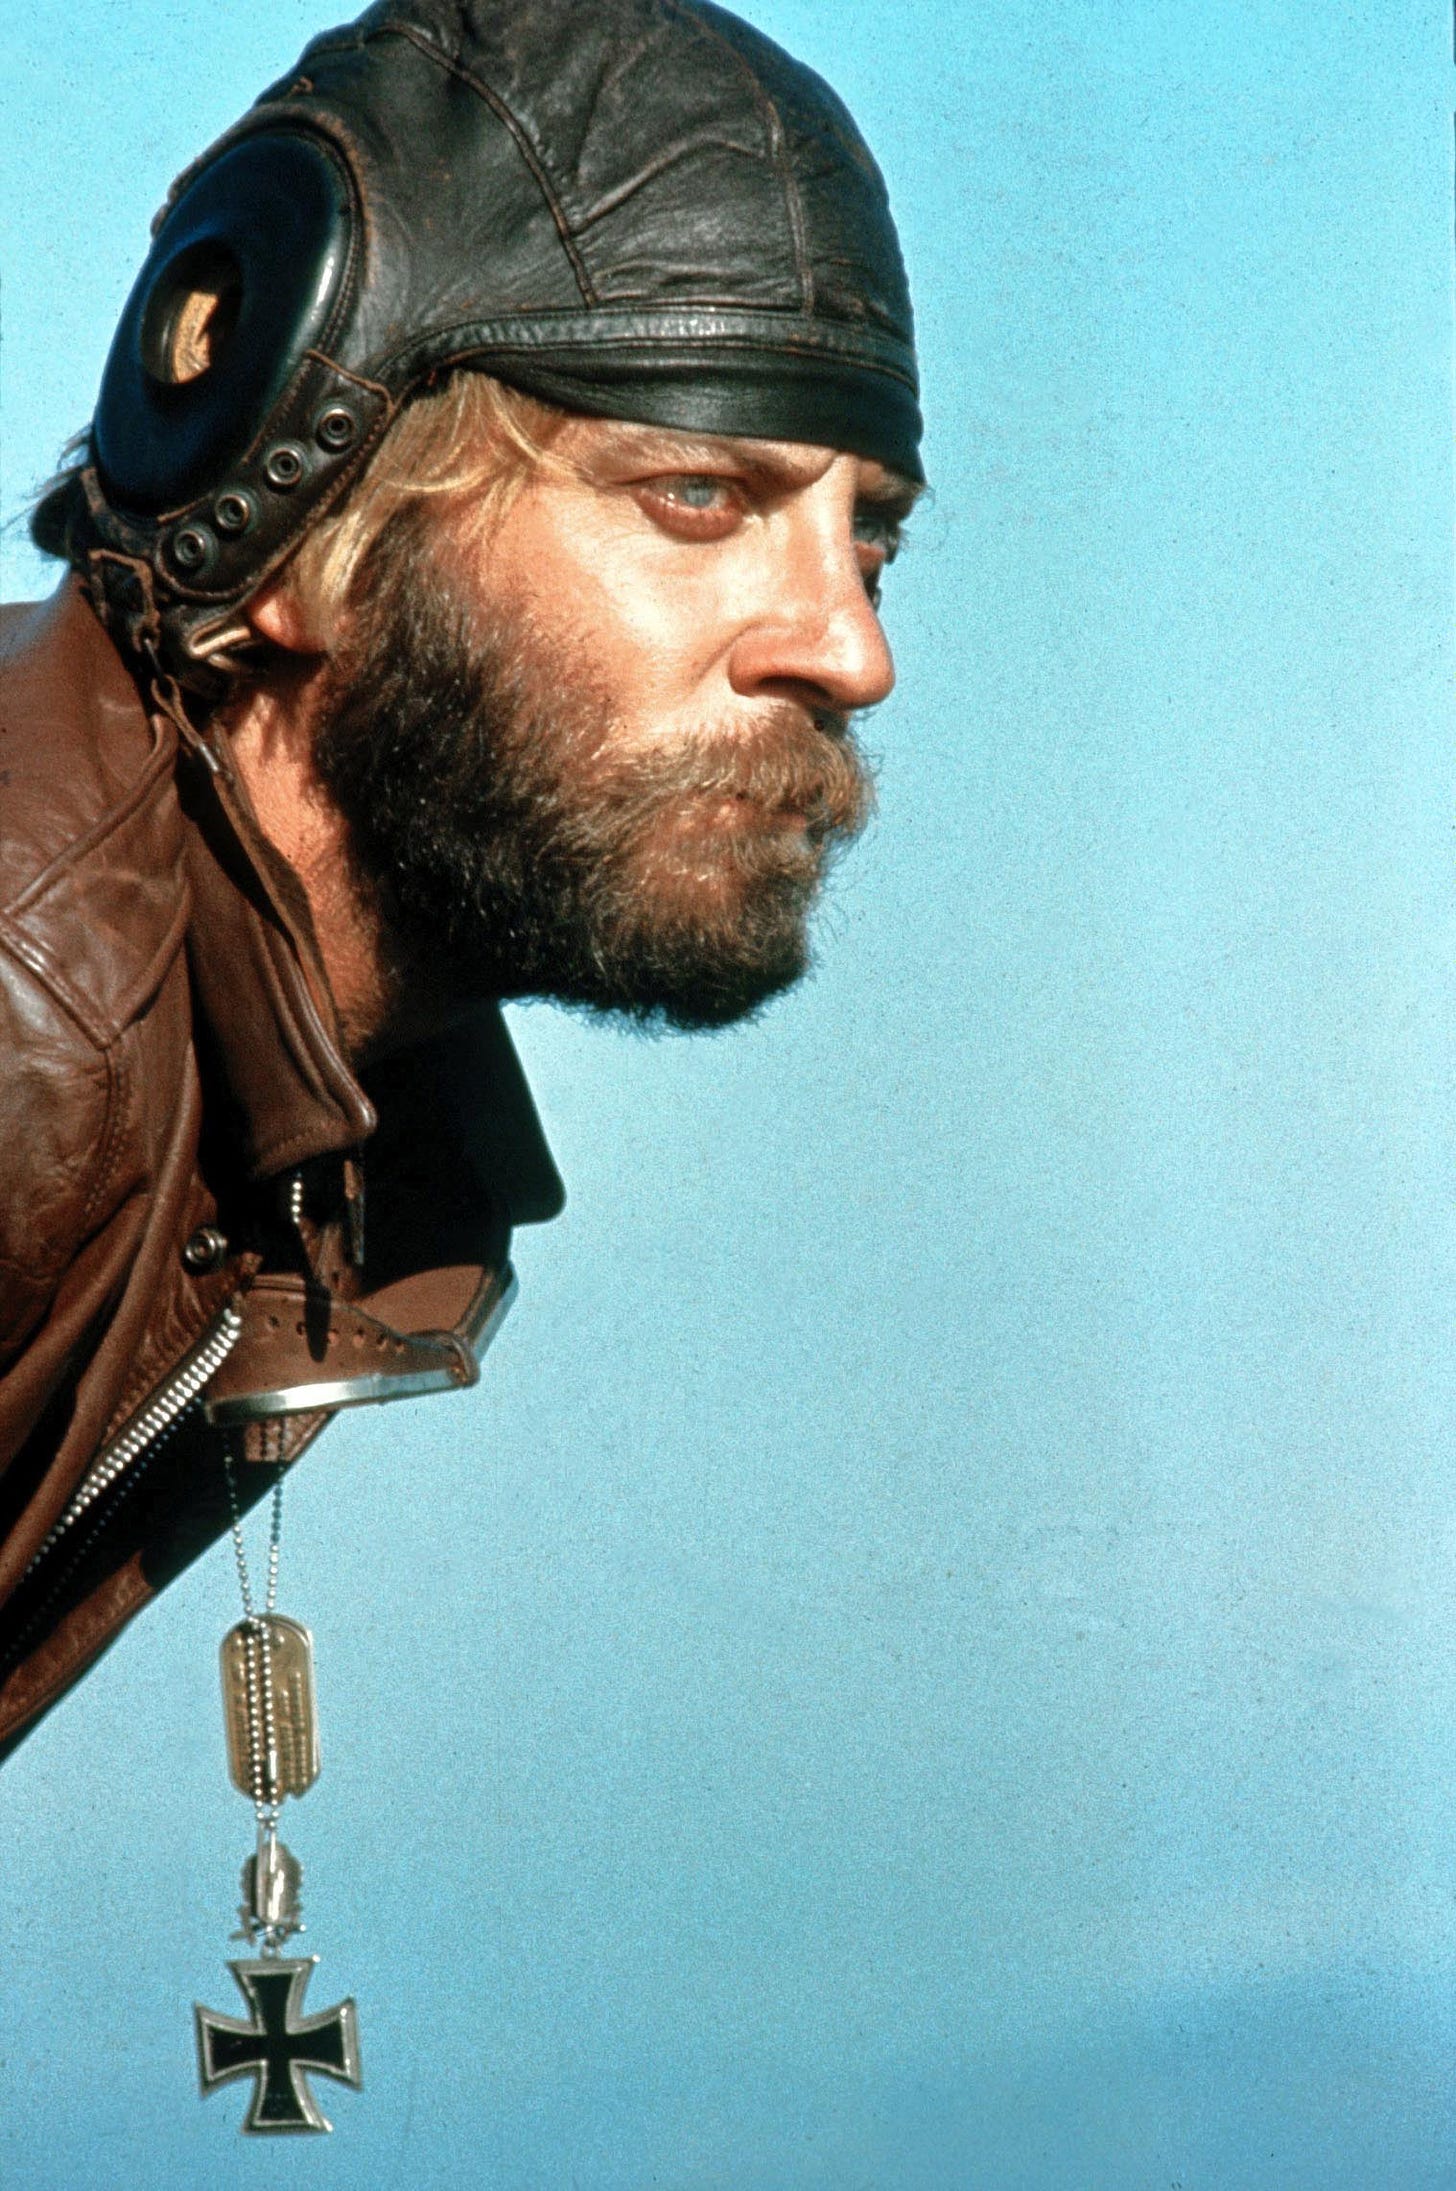 Profile portrait of actor Donald Sutherland wearing a leather military helment and a leather jacket and looking seriously into the distance in the film Kelly's Heroes